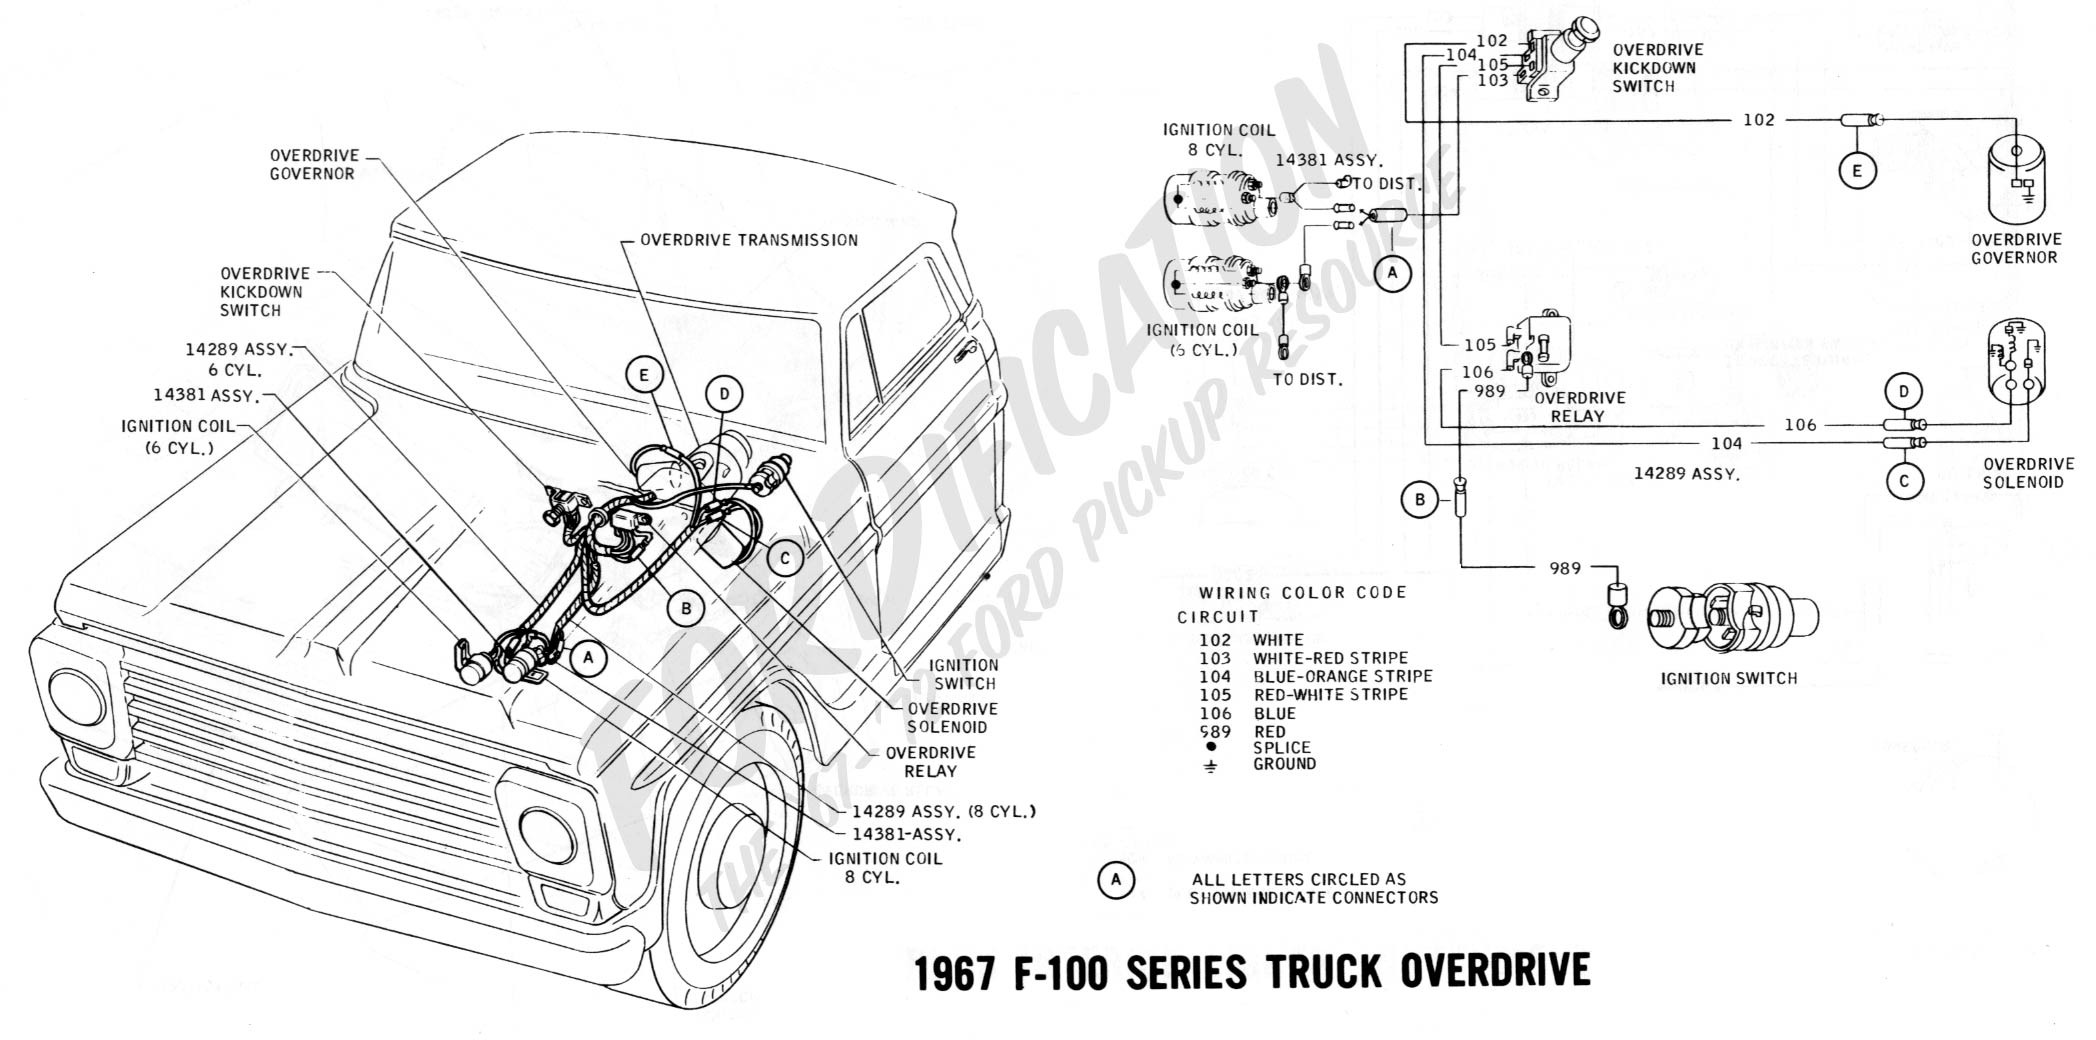 Truck Steering System Diagram ford Truck Technical Drawings and Schematics Section H Wiring Of Truck Steering System Diagram